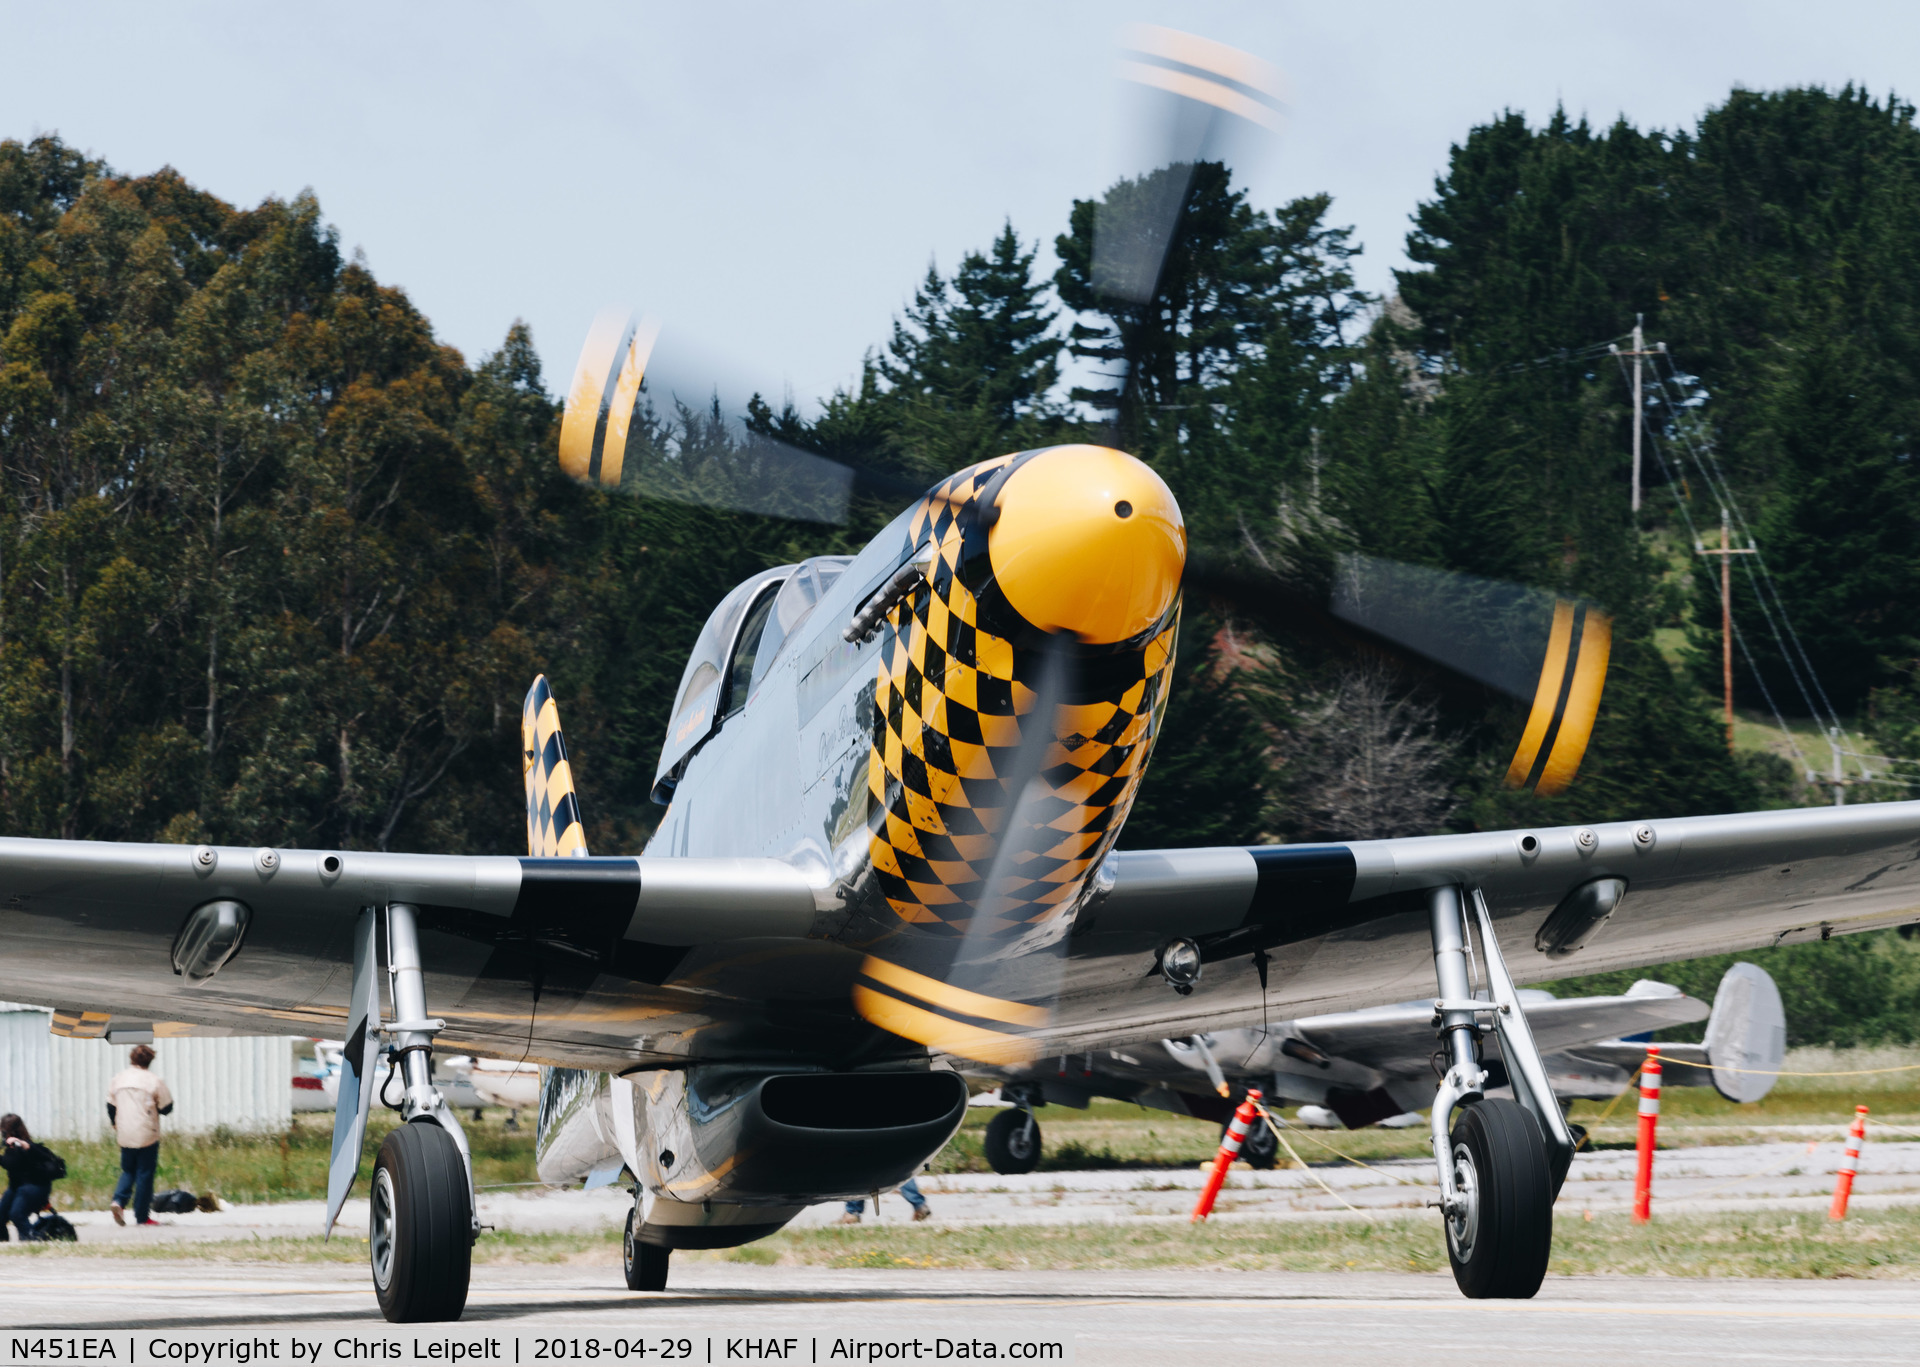 N451EA, 1944 North American F-51D Mustang C/N 44-73079, 1944 North American F-51D taxing out for departure at Half Moon Bay Airport Day 2018.